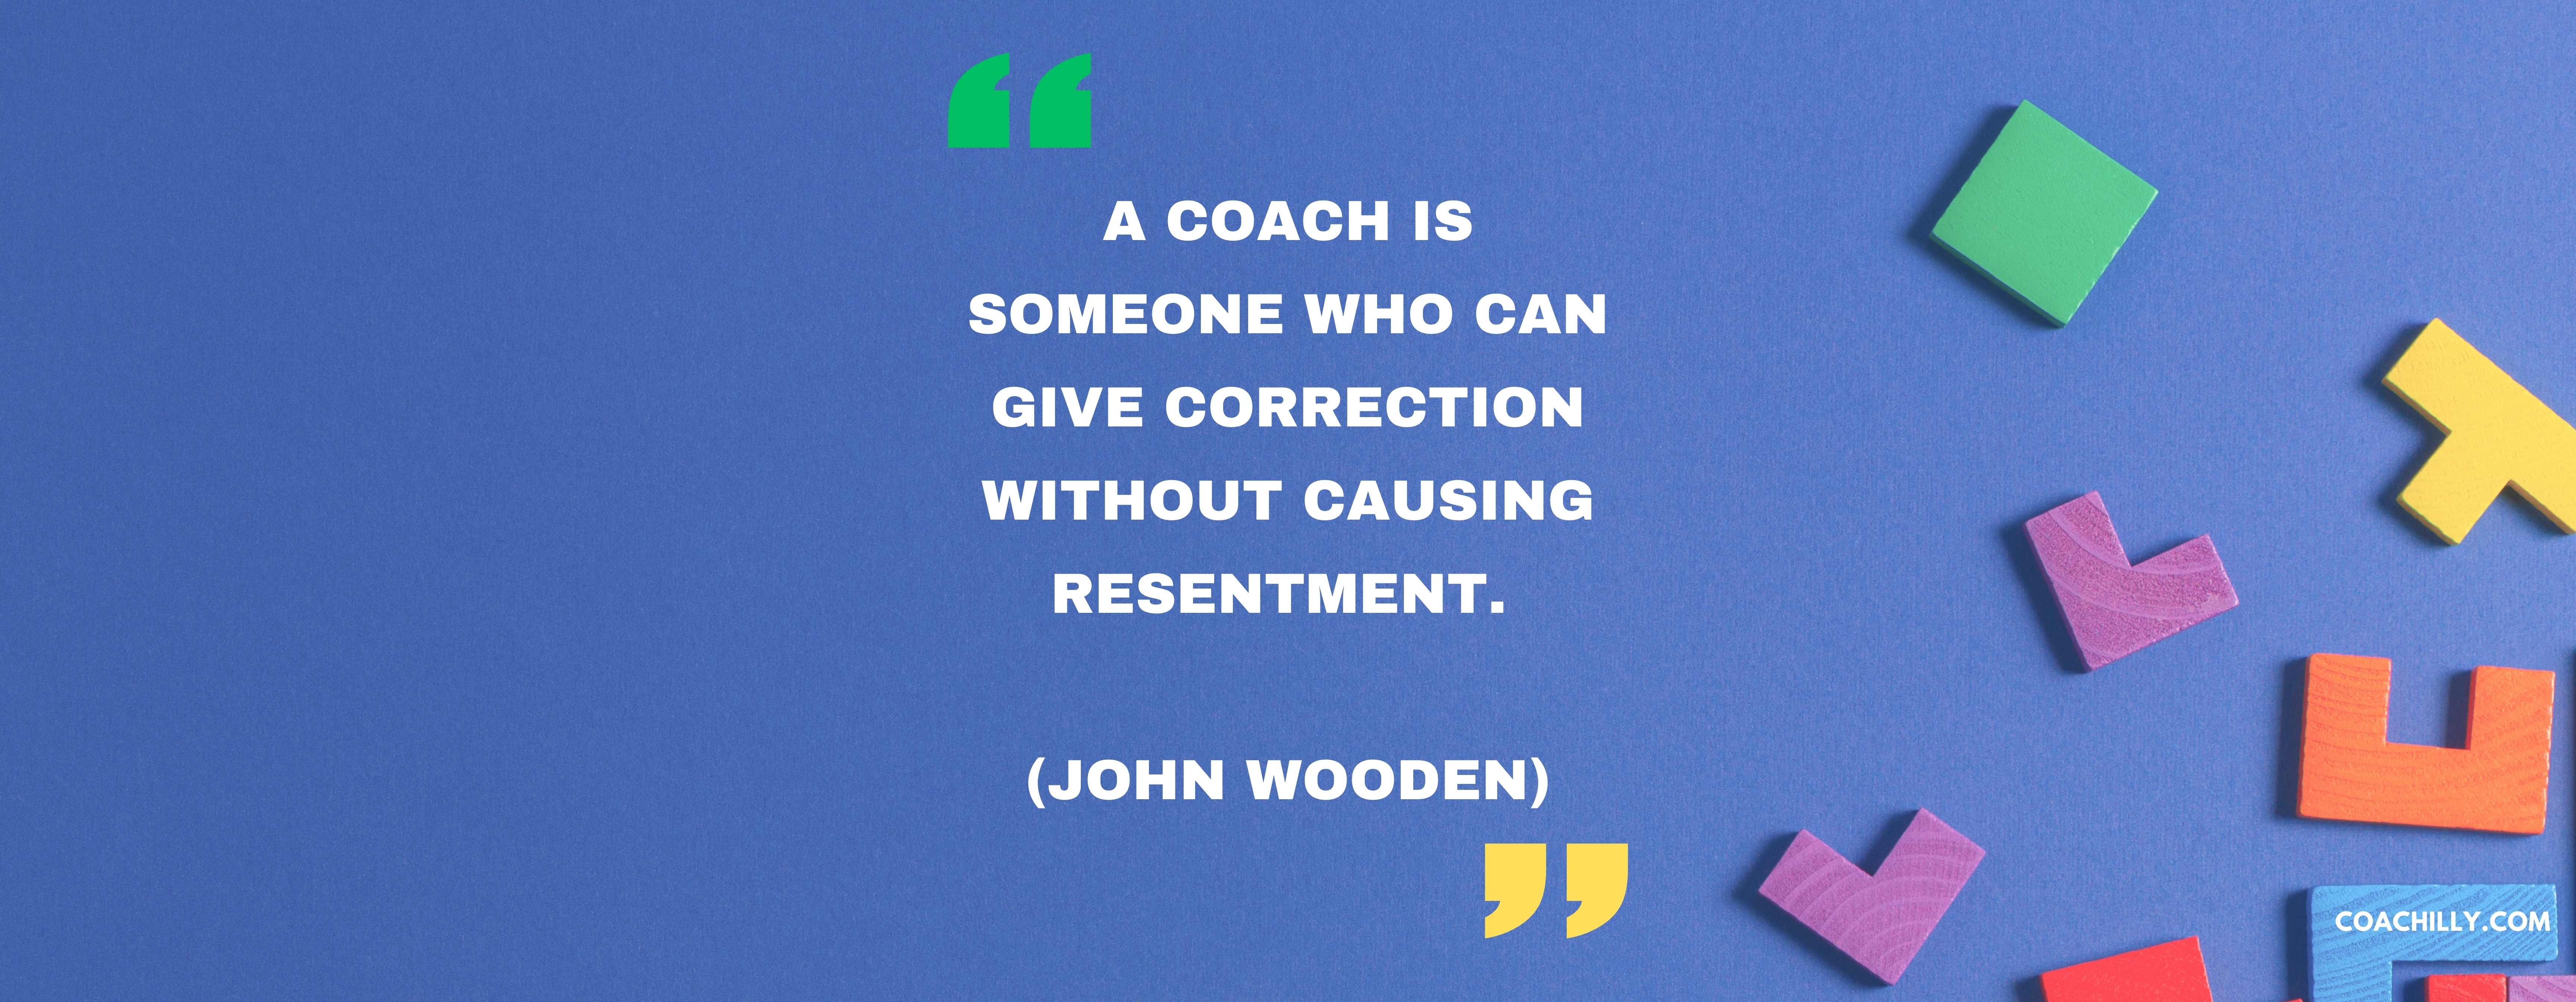 Quote from John Wooden about coaches giving feedback without causing resentment - Article on effective coaching techniques